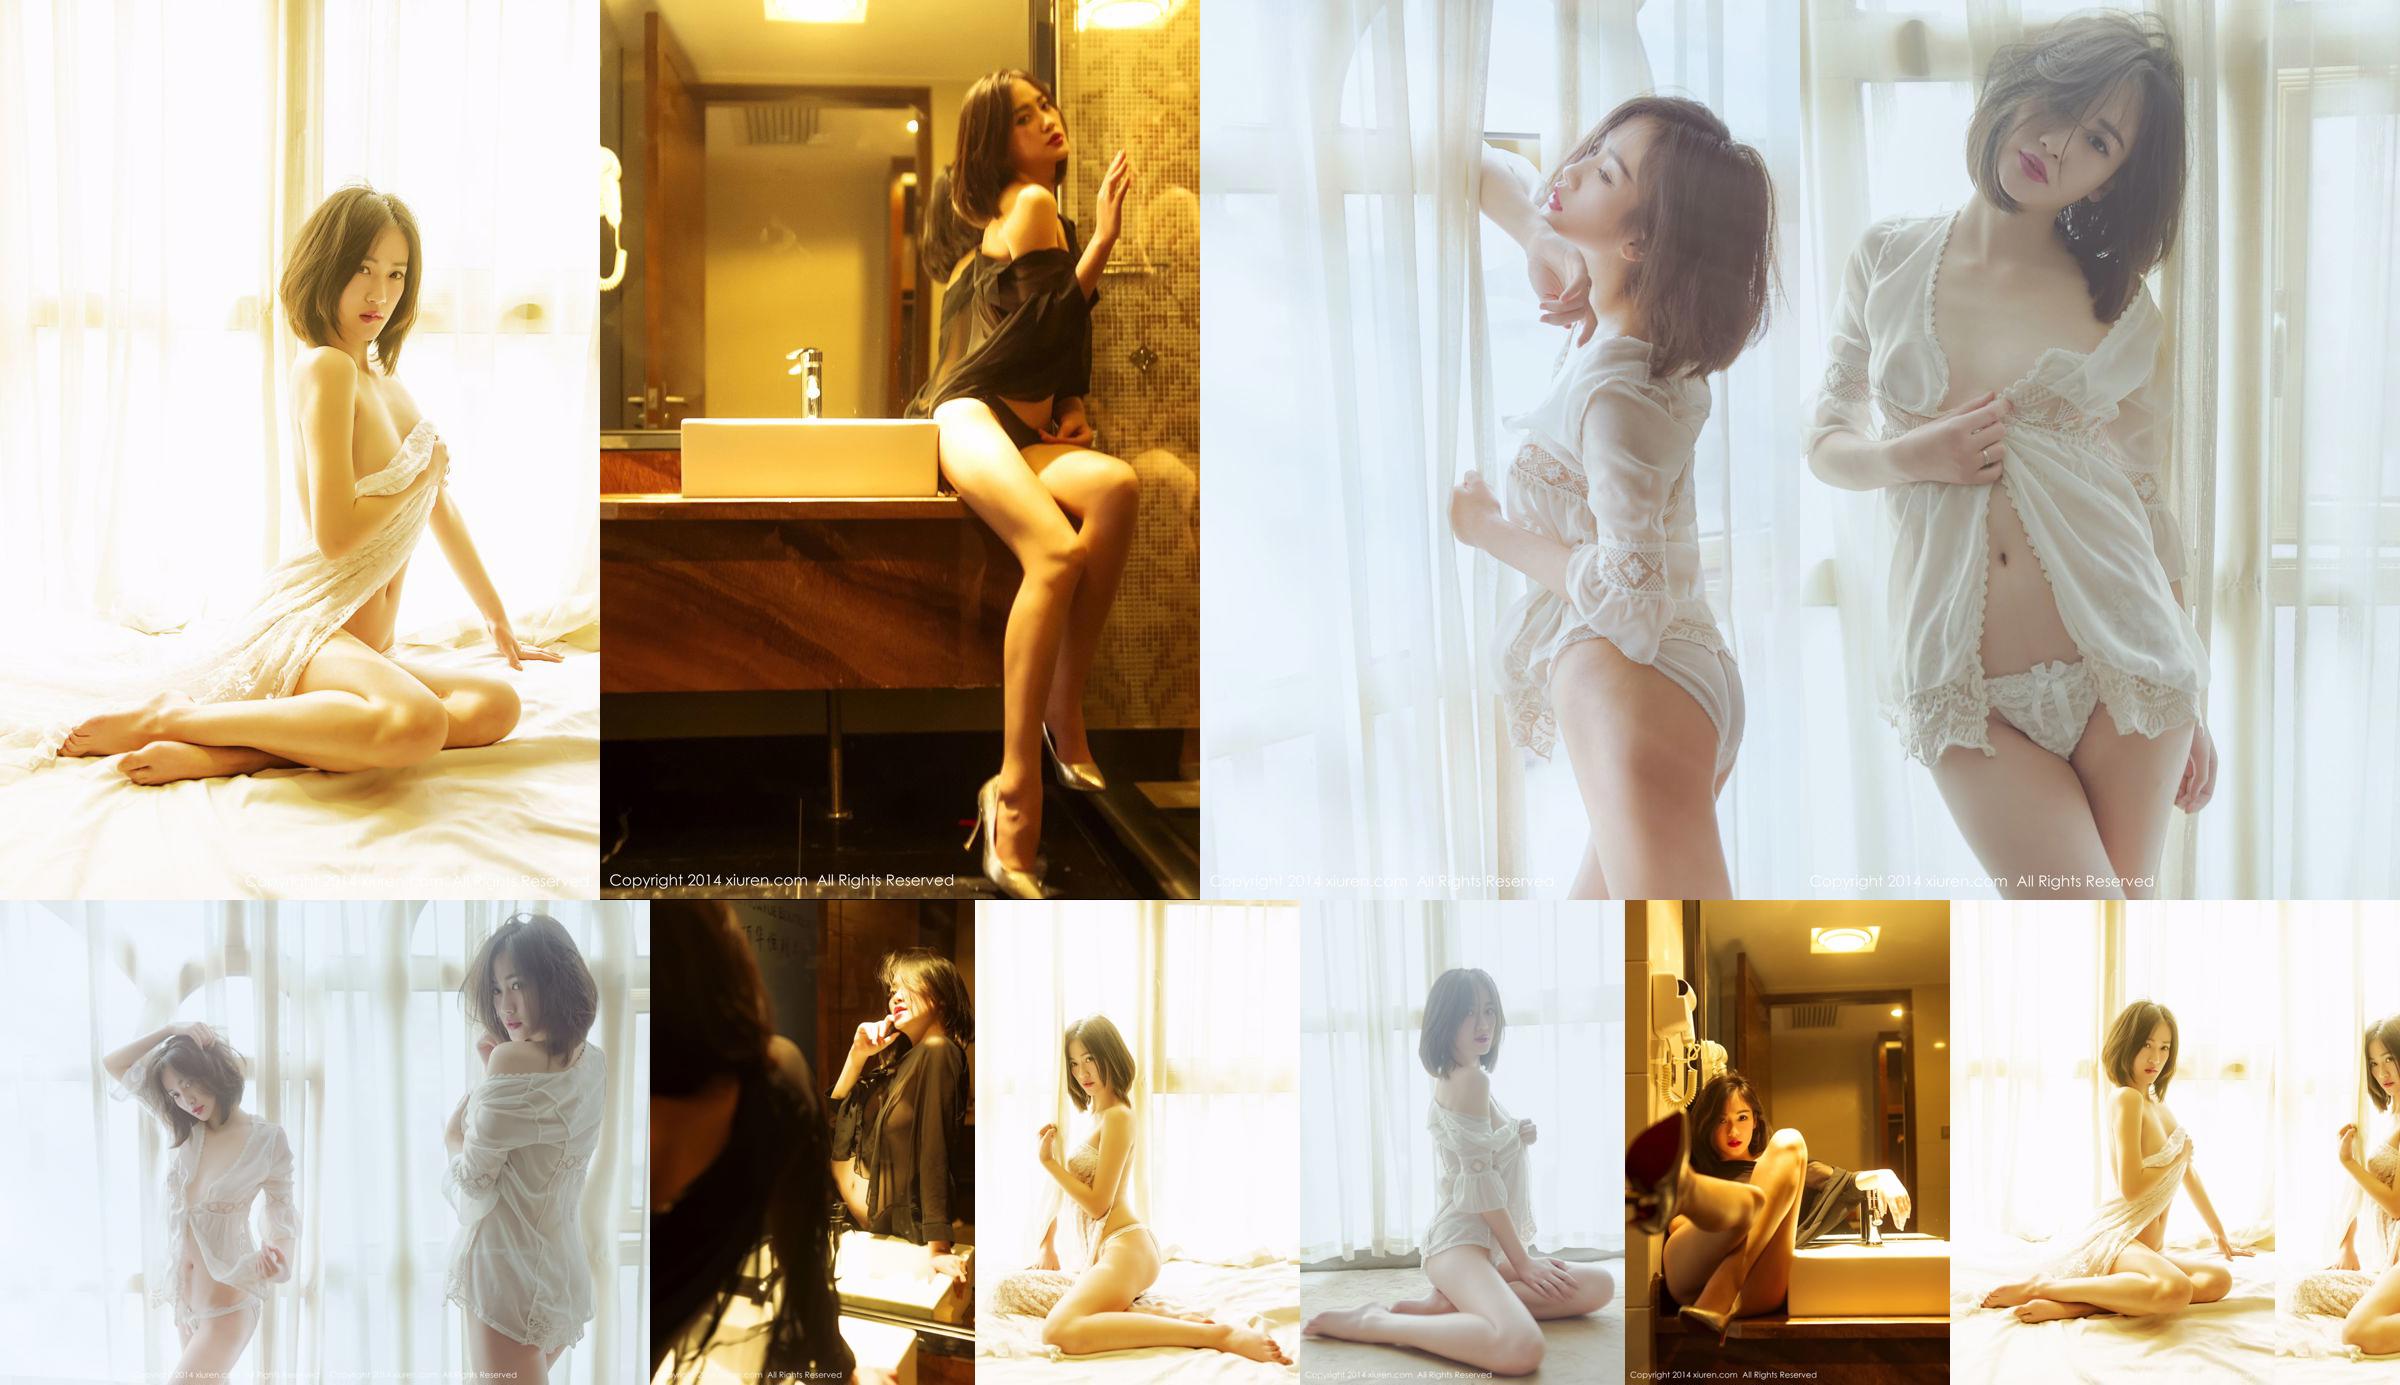 [TheBlackAlley] Sherly Tang underwear seduces the human body No.043d5b Page 4